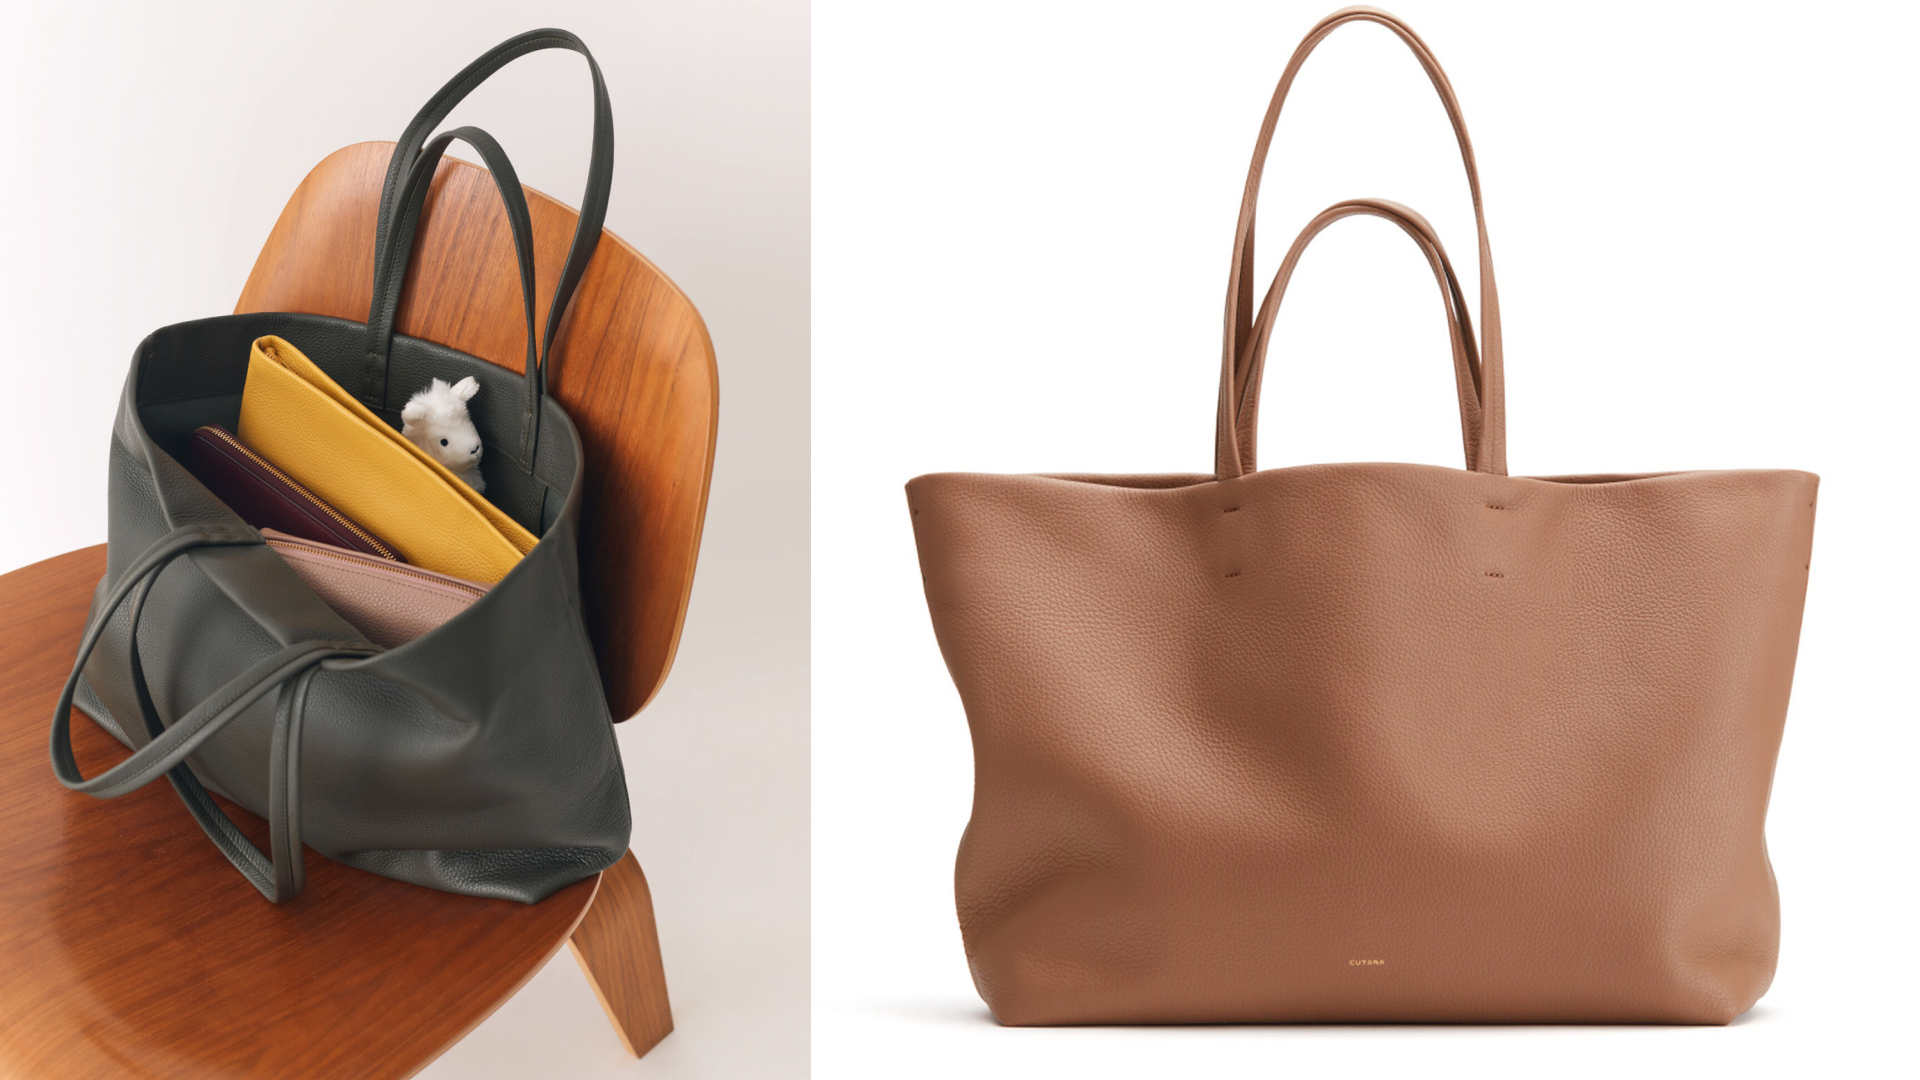 The Best Looking Bucket Bags - The Zhush